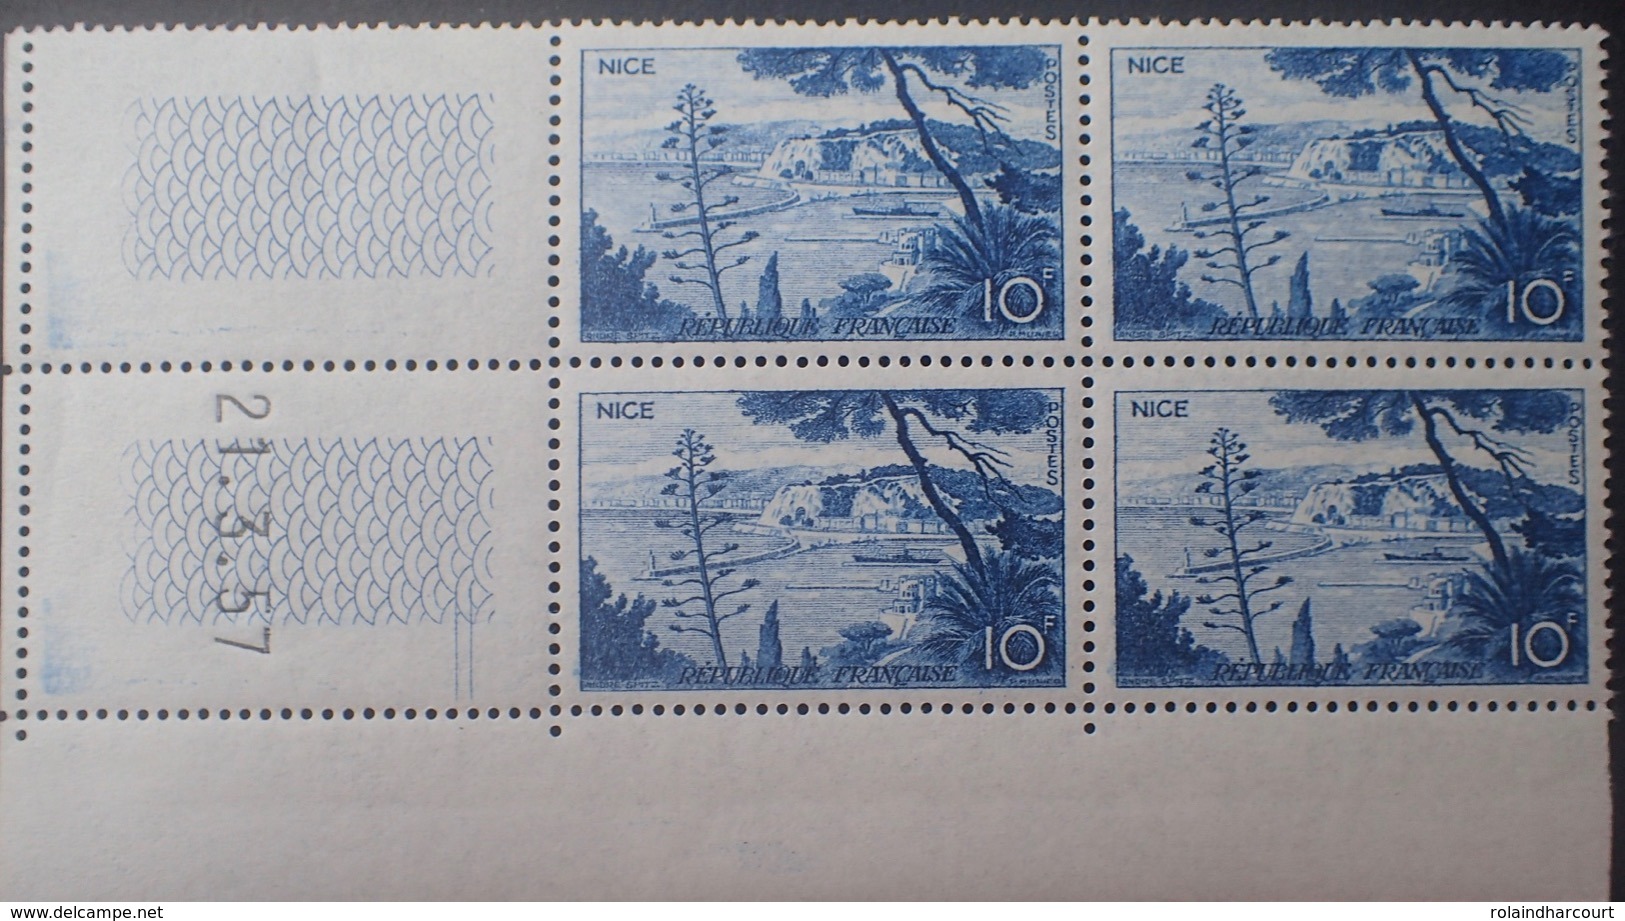 R1949/1289 - 1957 - NICE - N°1038 TIMBRES NEUFS** CdF Date - 1950-1959